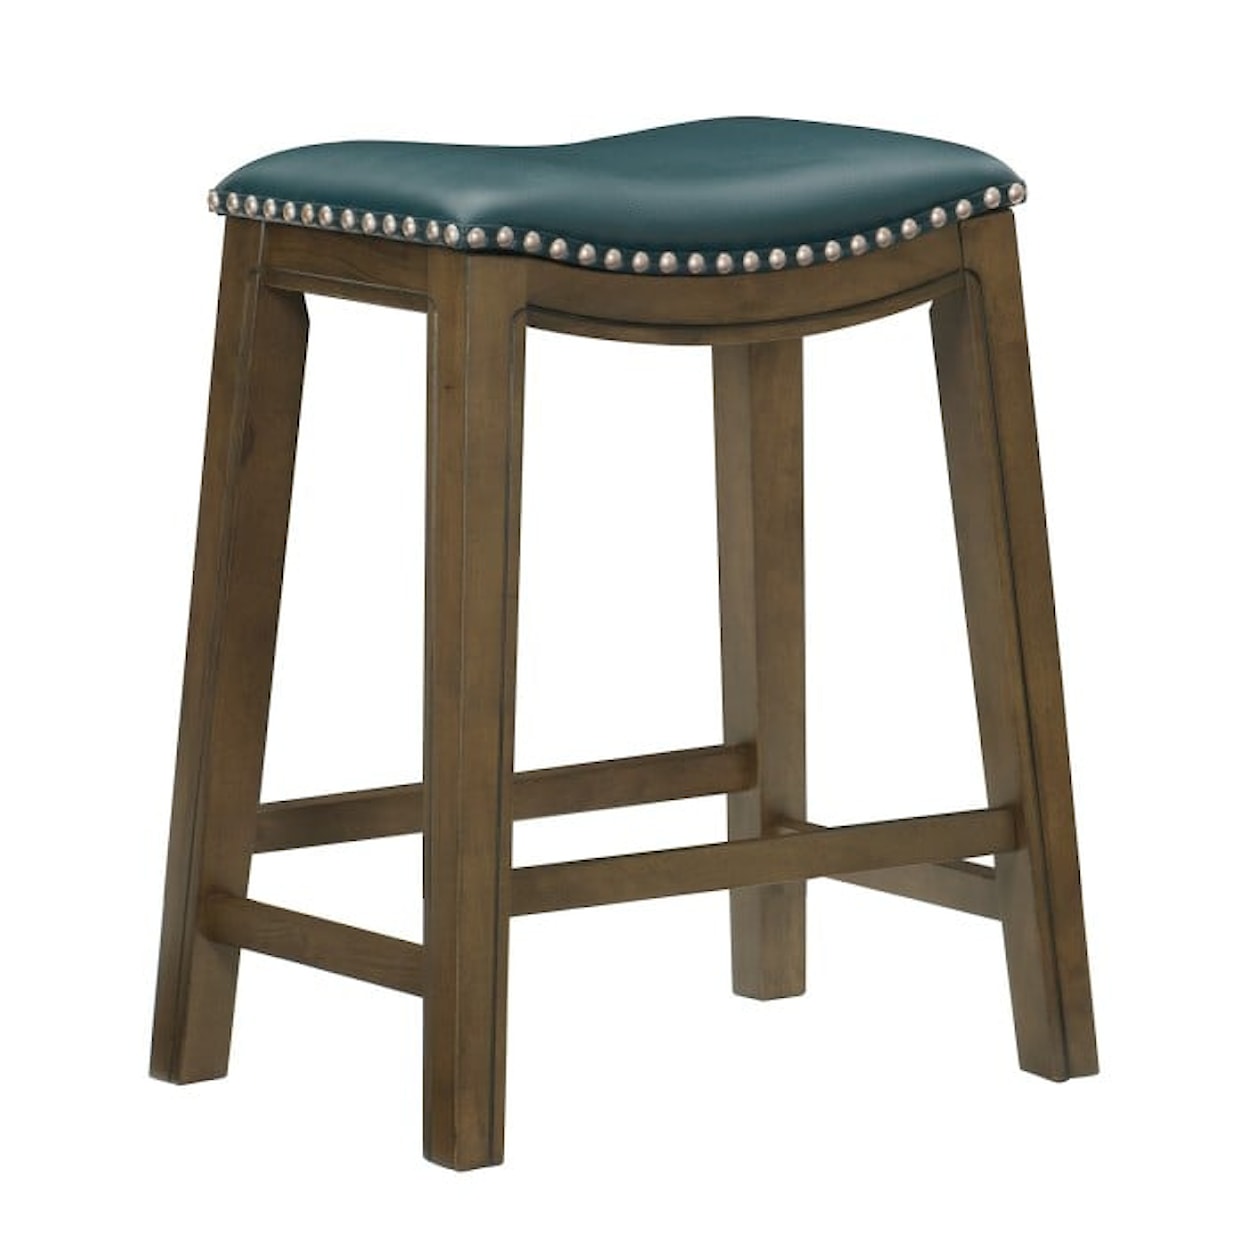 Homelegance Ordway 24 Counter Height Stool, Green